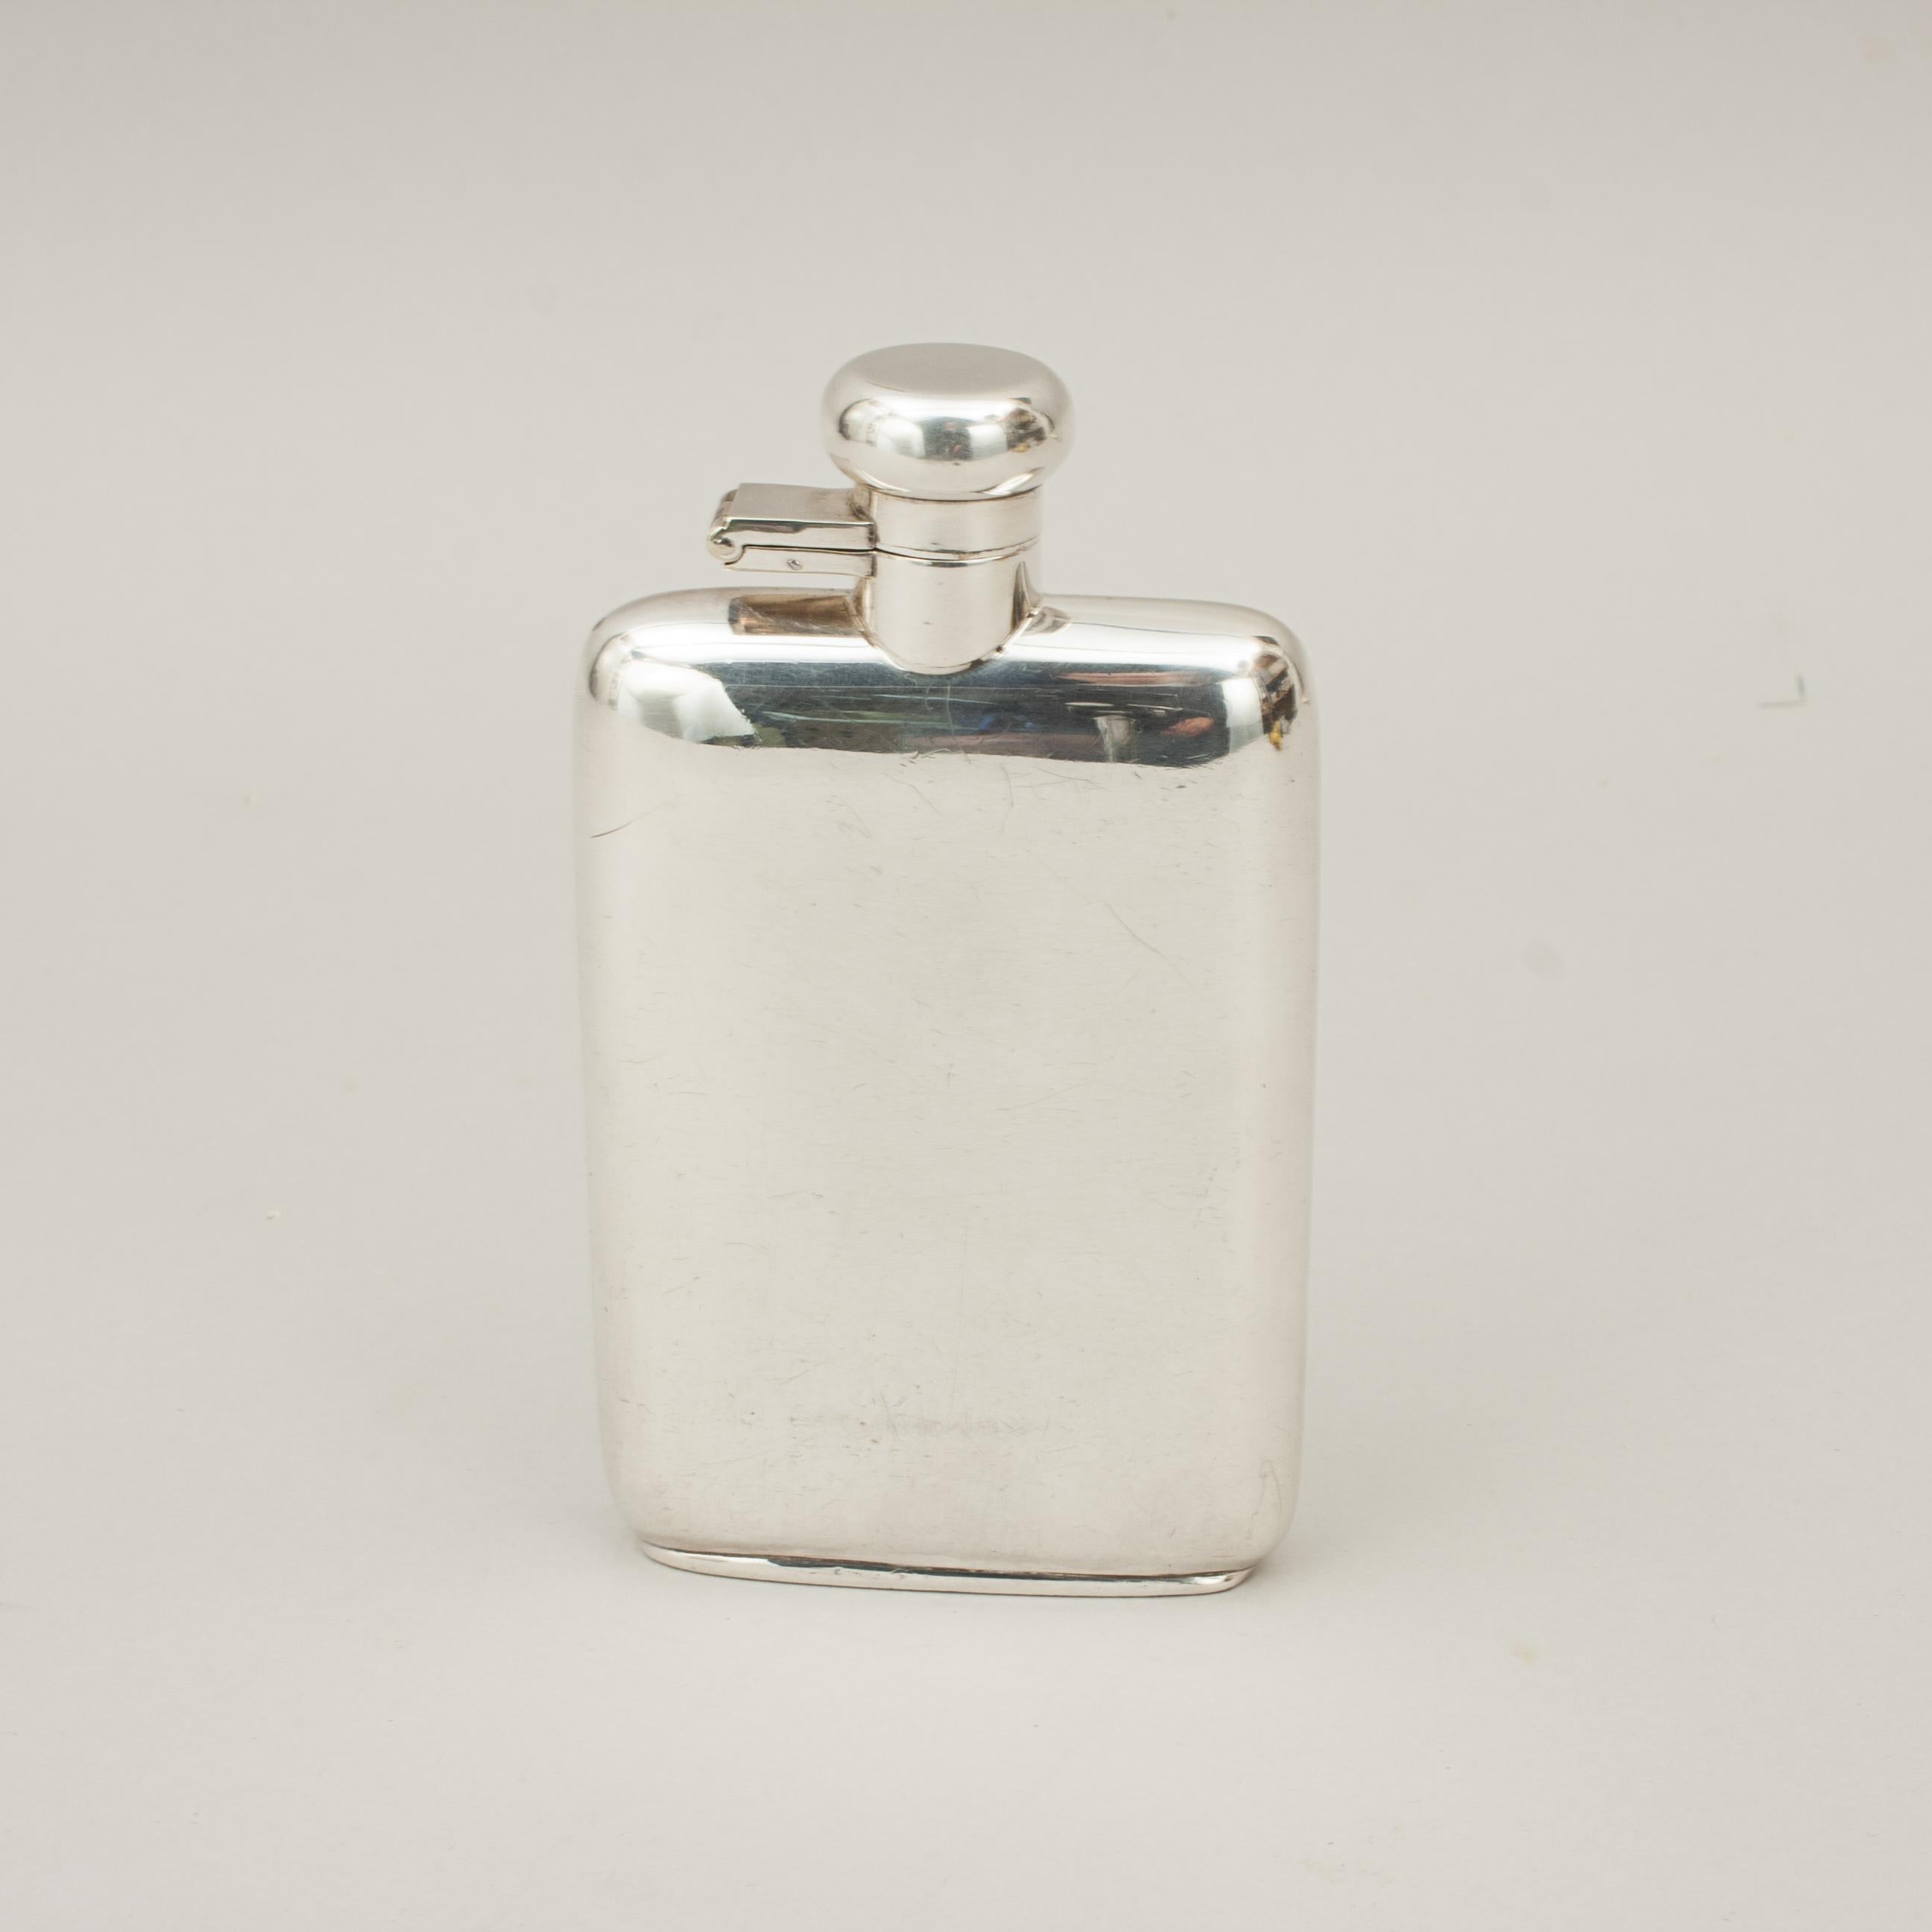 Early 20th Century Silver Plated Hip Flask, William Hutton & Sons